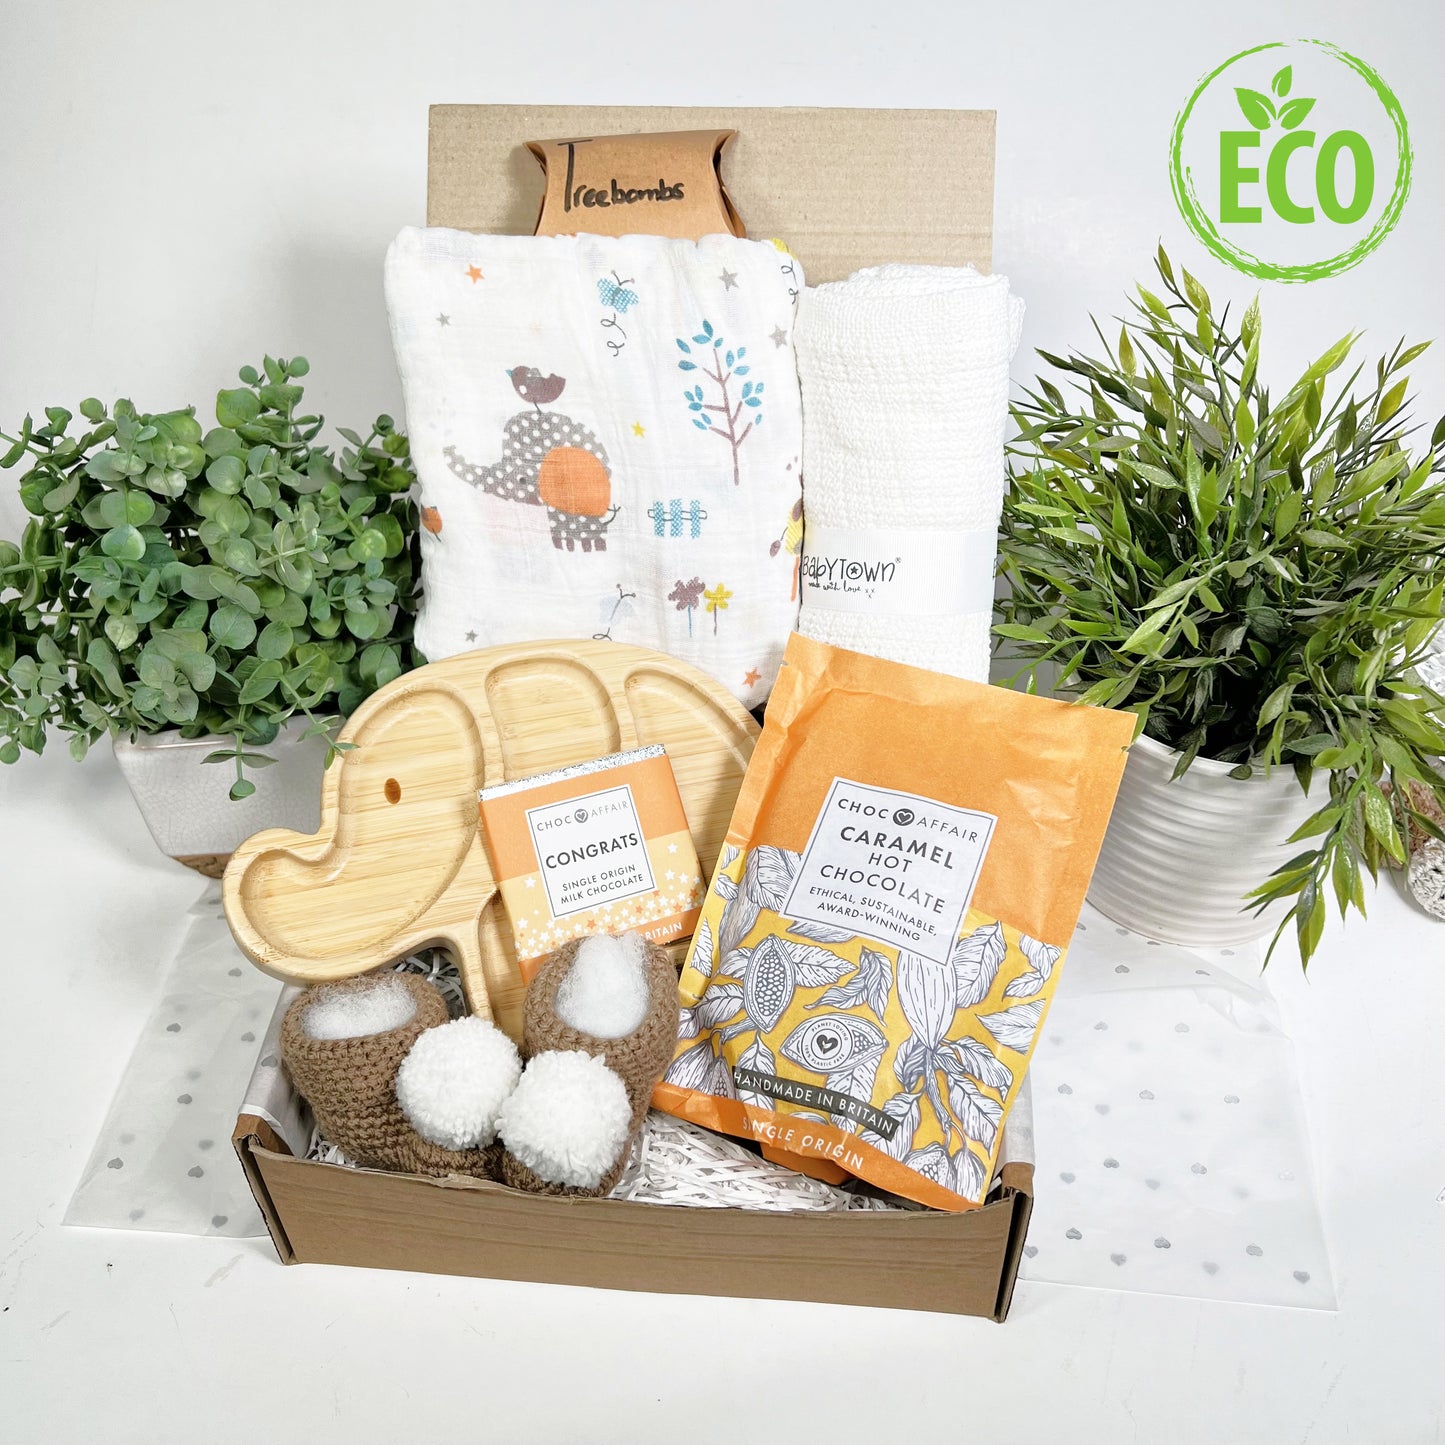 Eco Friendly neutral baby shower gift hamper box containing a bamboo elephant shaped baby plate with 3 internal sections, a large muslin square with a neutral elephant and jungle print, a white cotton cellular baby blanket, a pouch of caramel hot chocolate and a chocolate var with the text "Congrats", a pair of crocheted baby booties with pompoms and a free packet of 3 Treebombs.